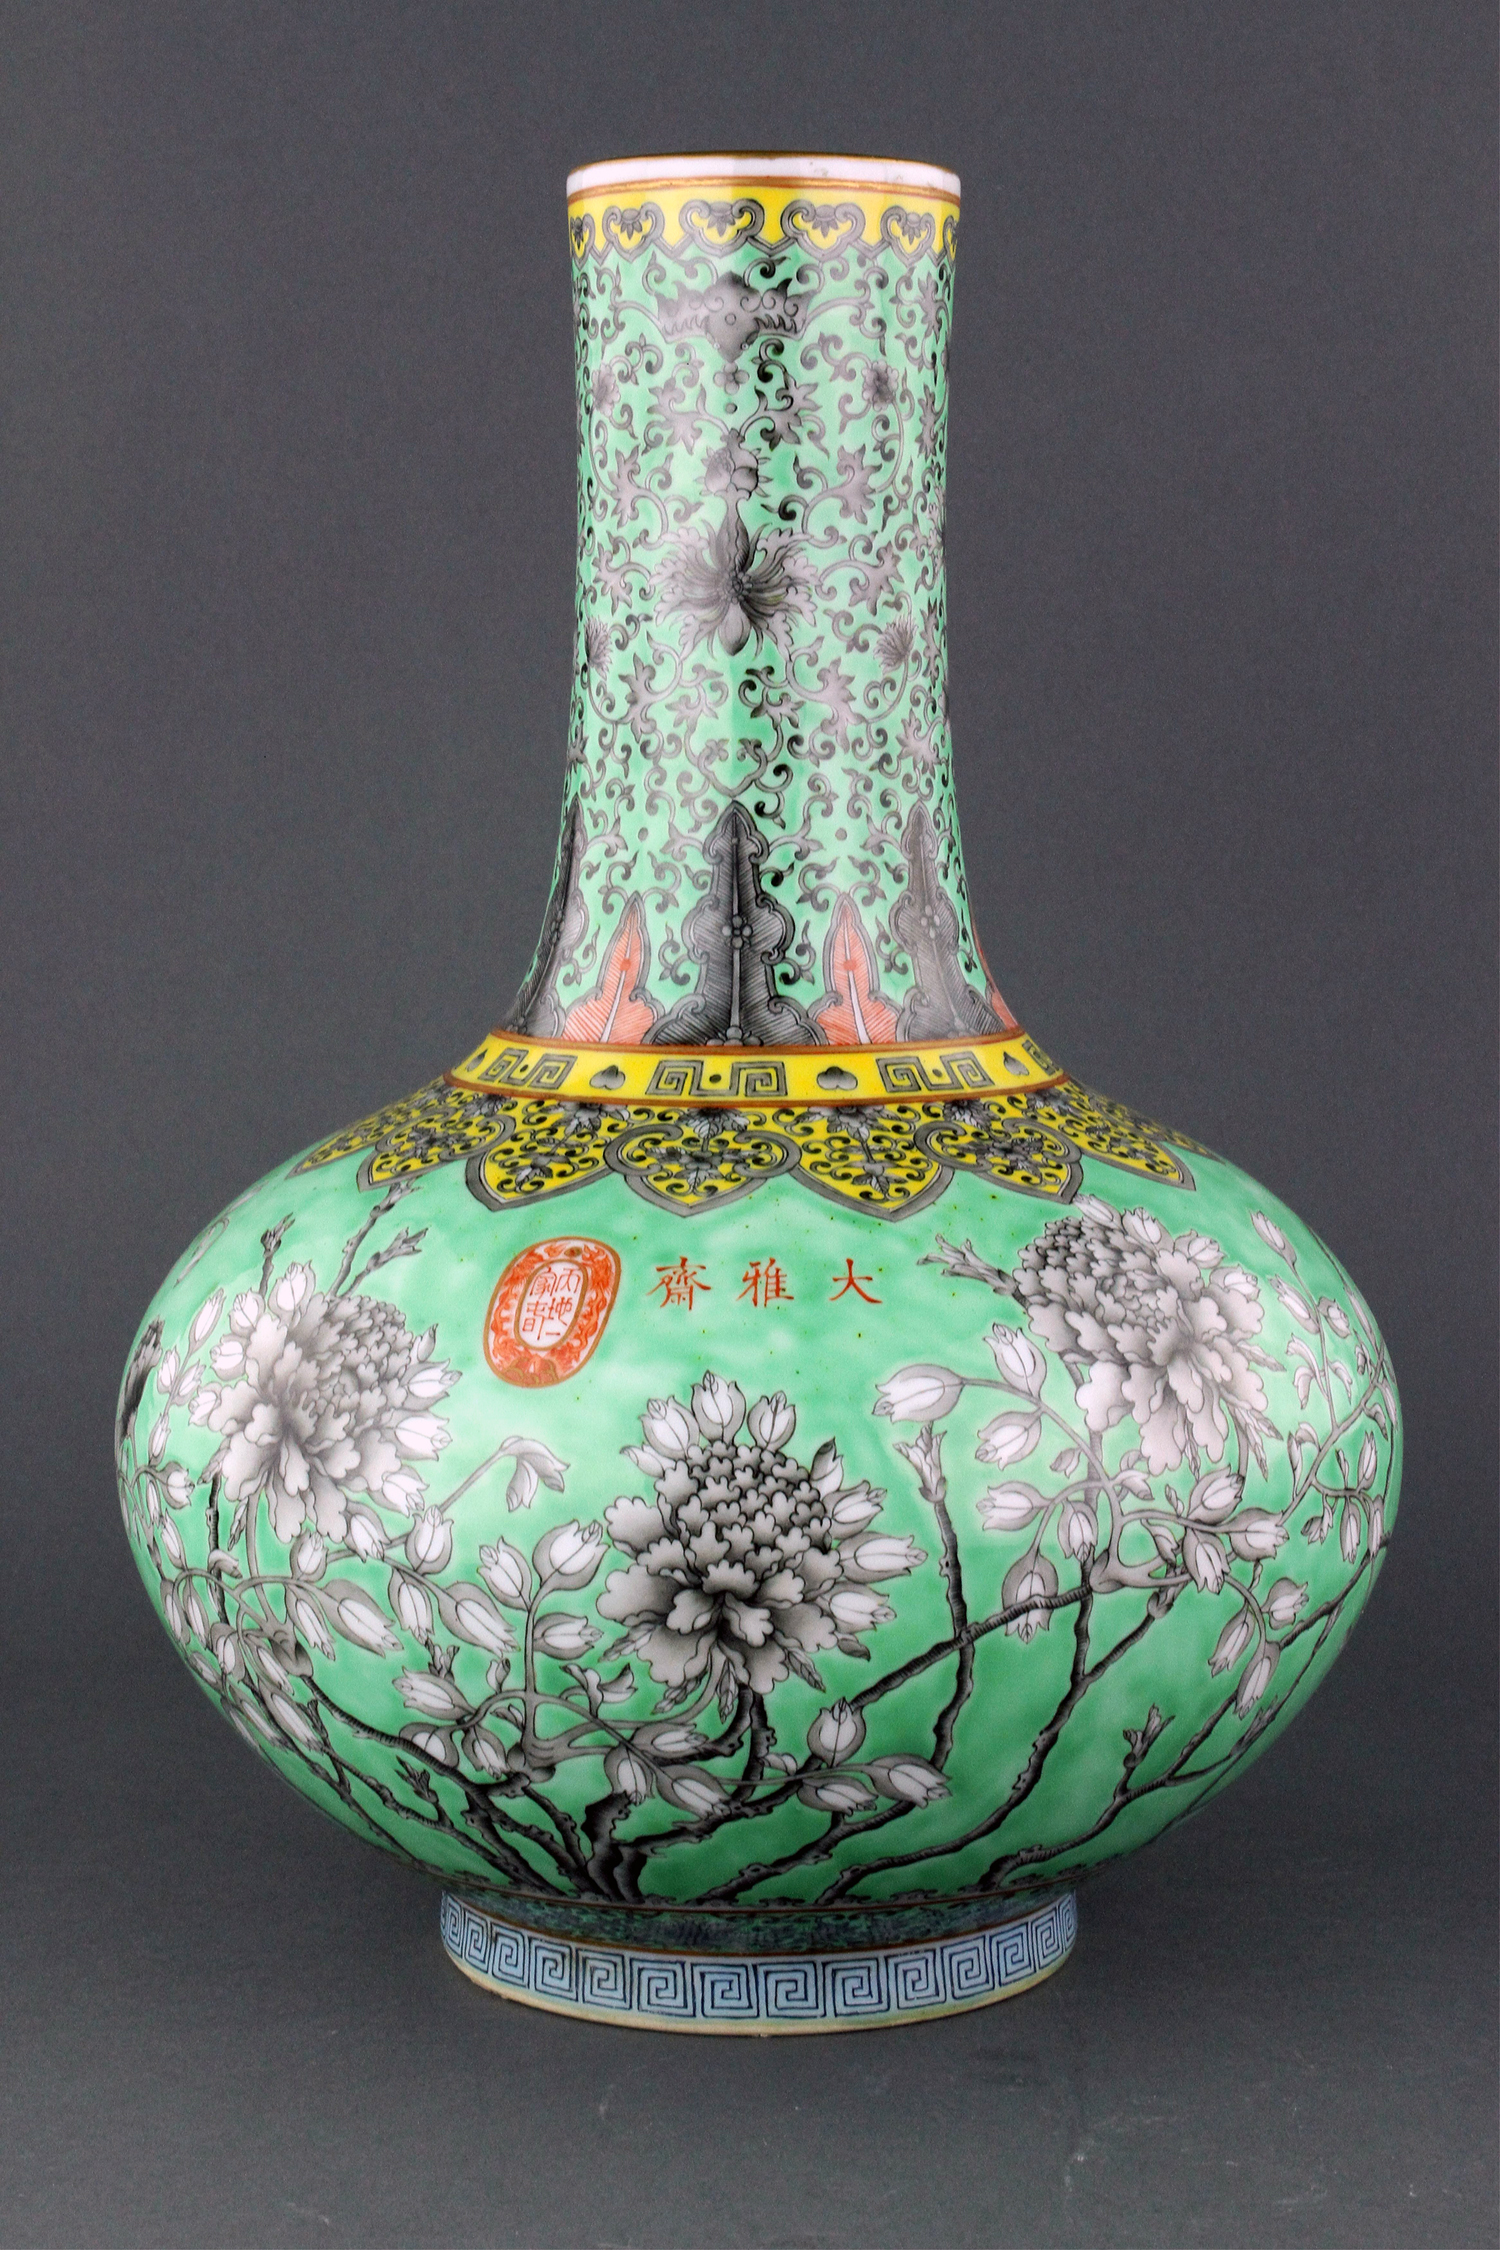 Chinese Dayazhai porcelain vase, three-character Dayazhai mark on body, four-character Yongqing Changchun red mark on base; 39 cm (15.6in). Estimate: $5,000-$10,000. 888 Auctions image